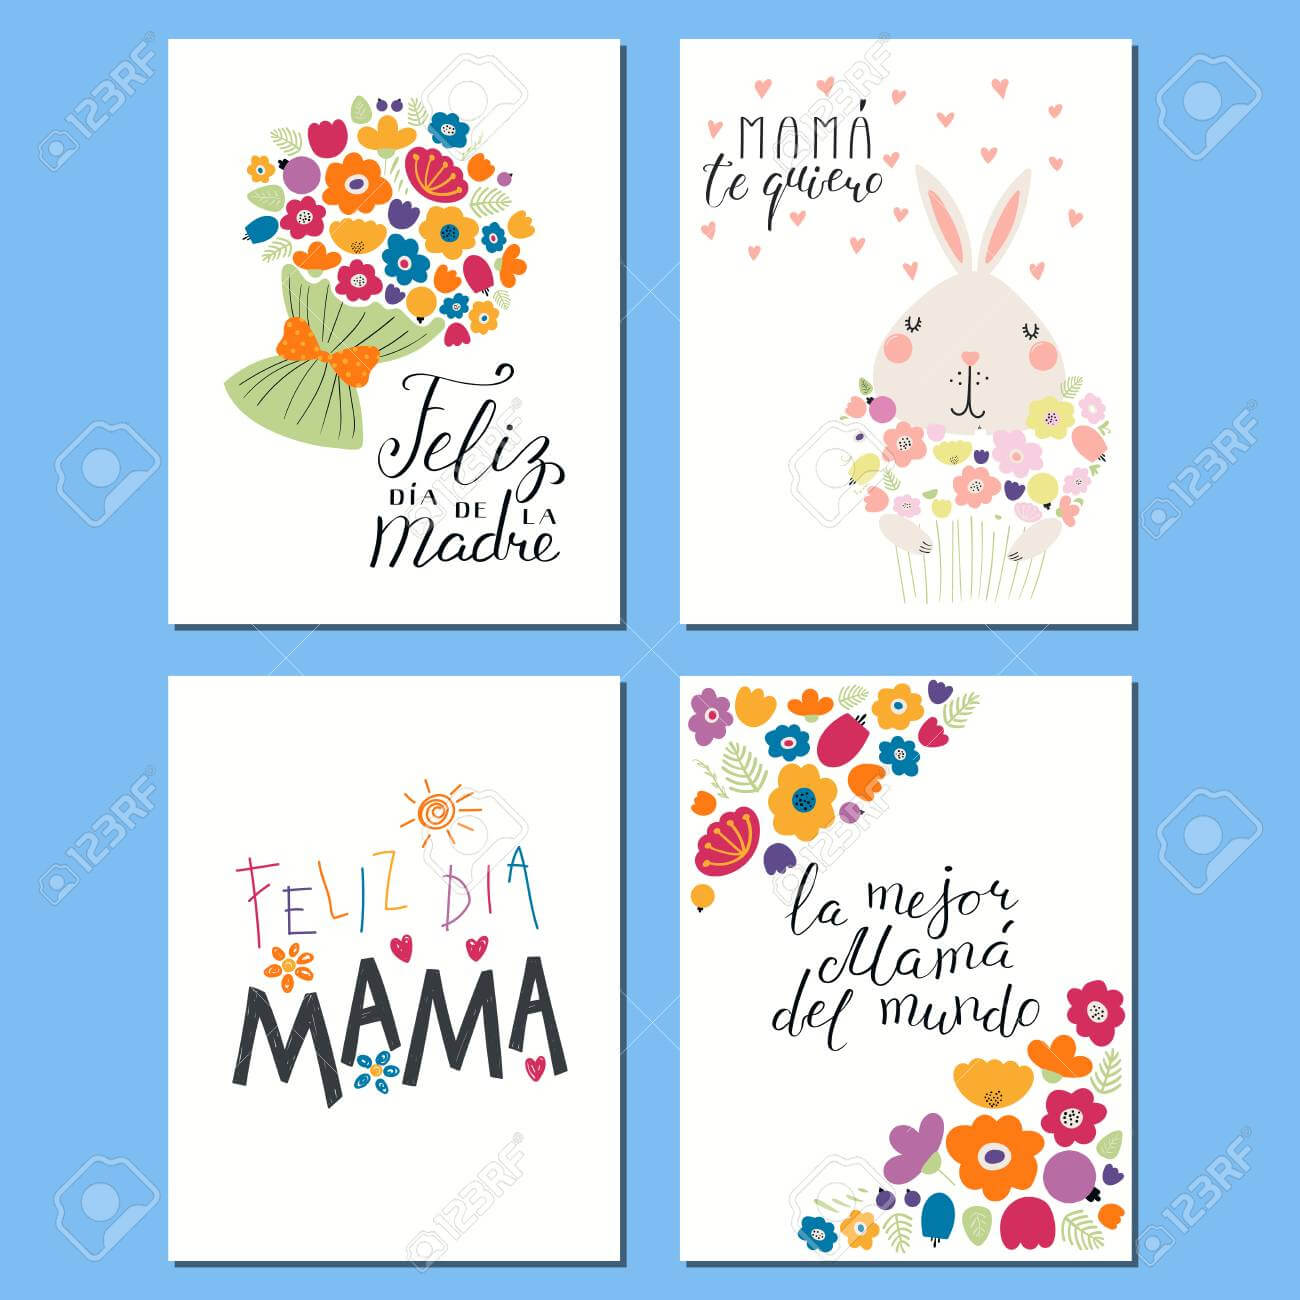 mother-s-day-saying-in-spanish-happy-mothers-day-quotes-in-spanish